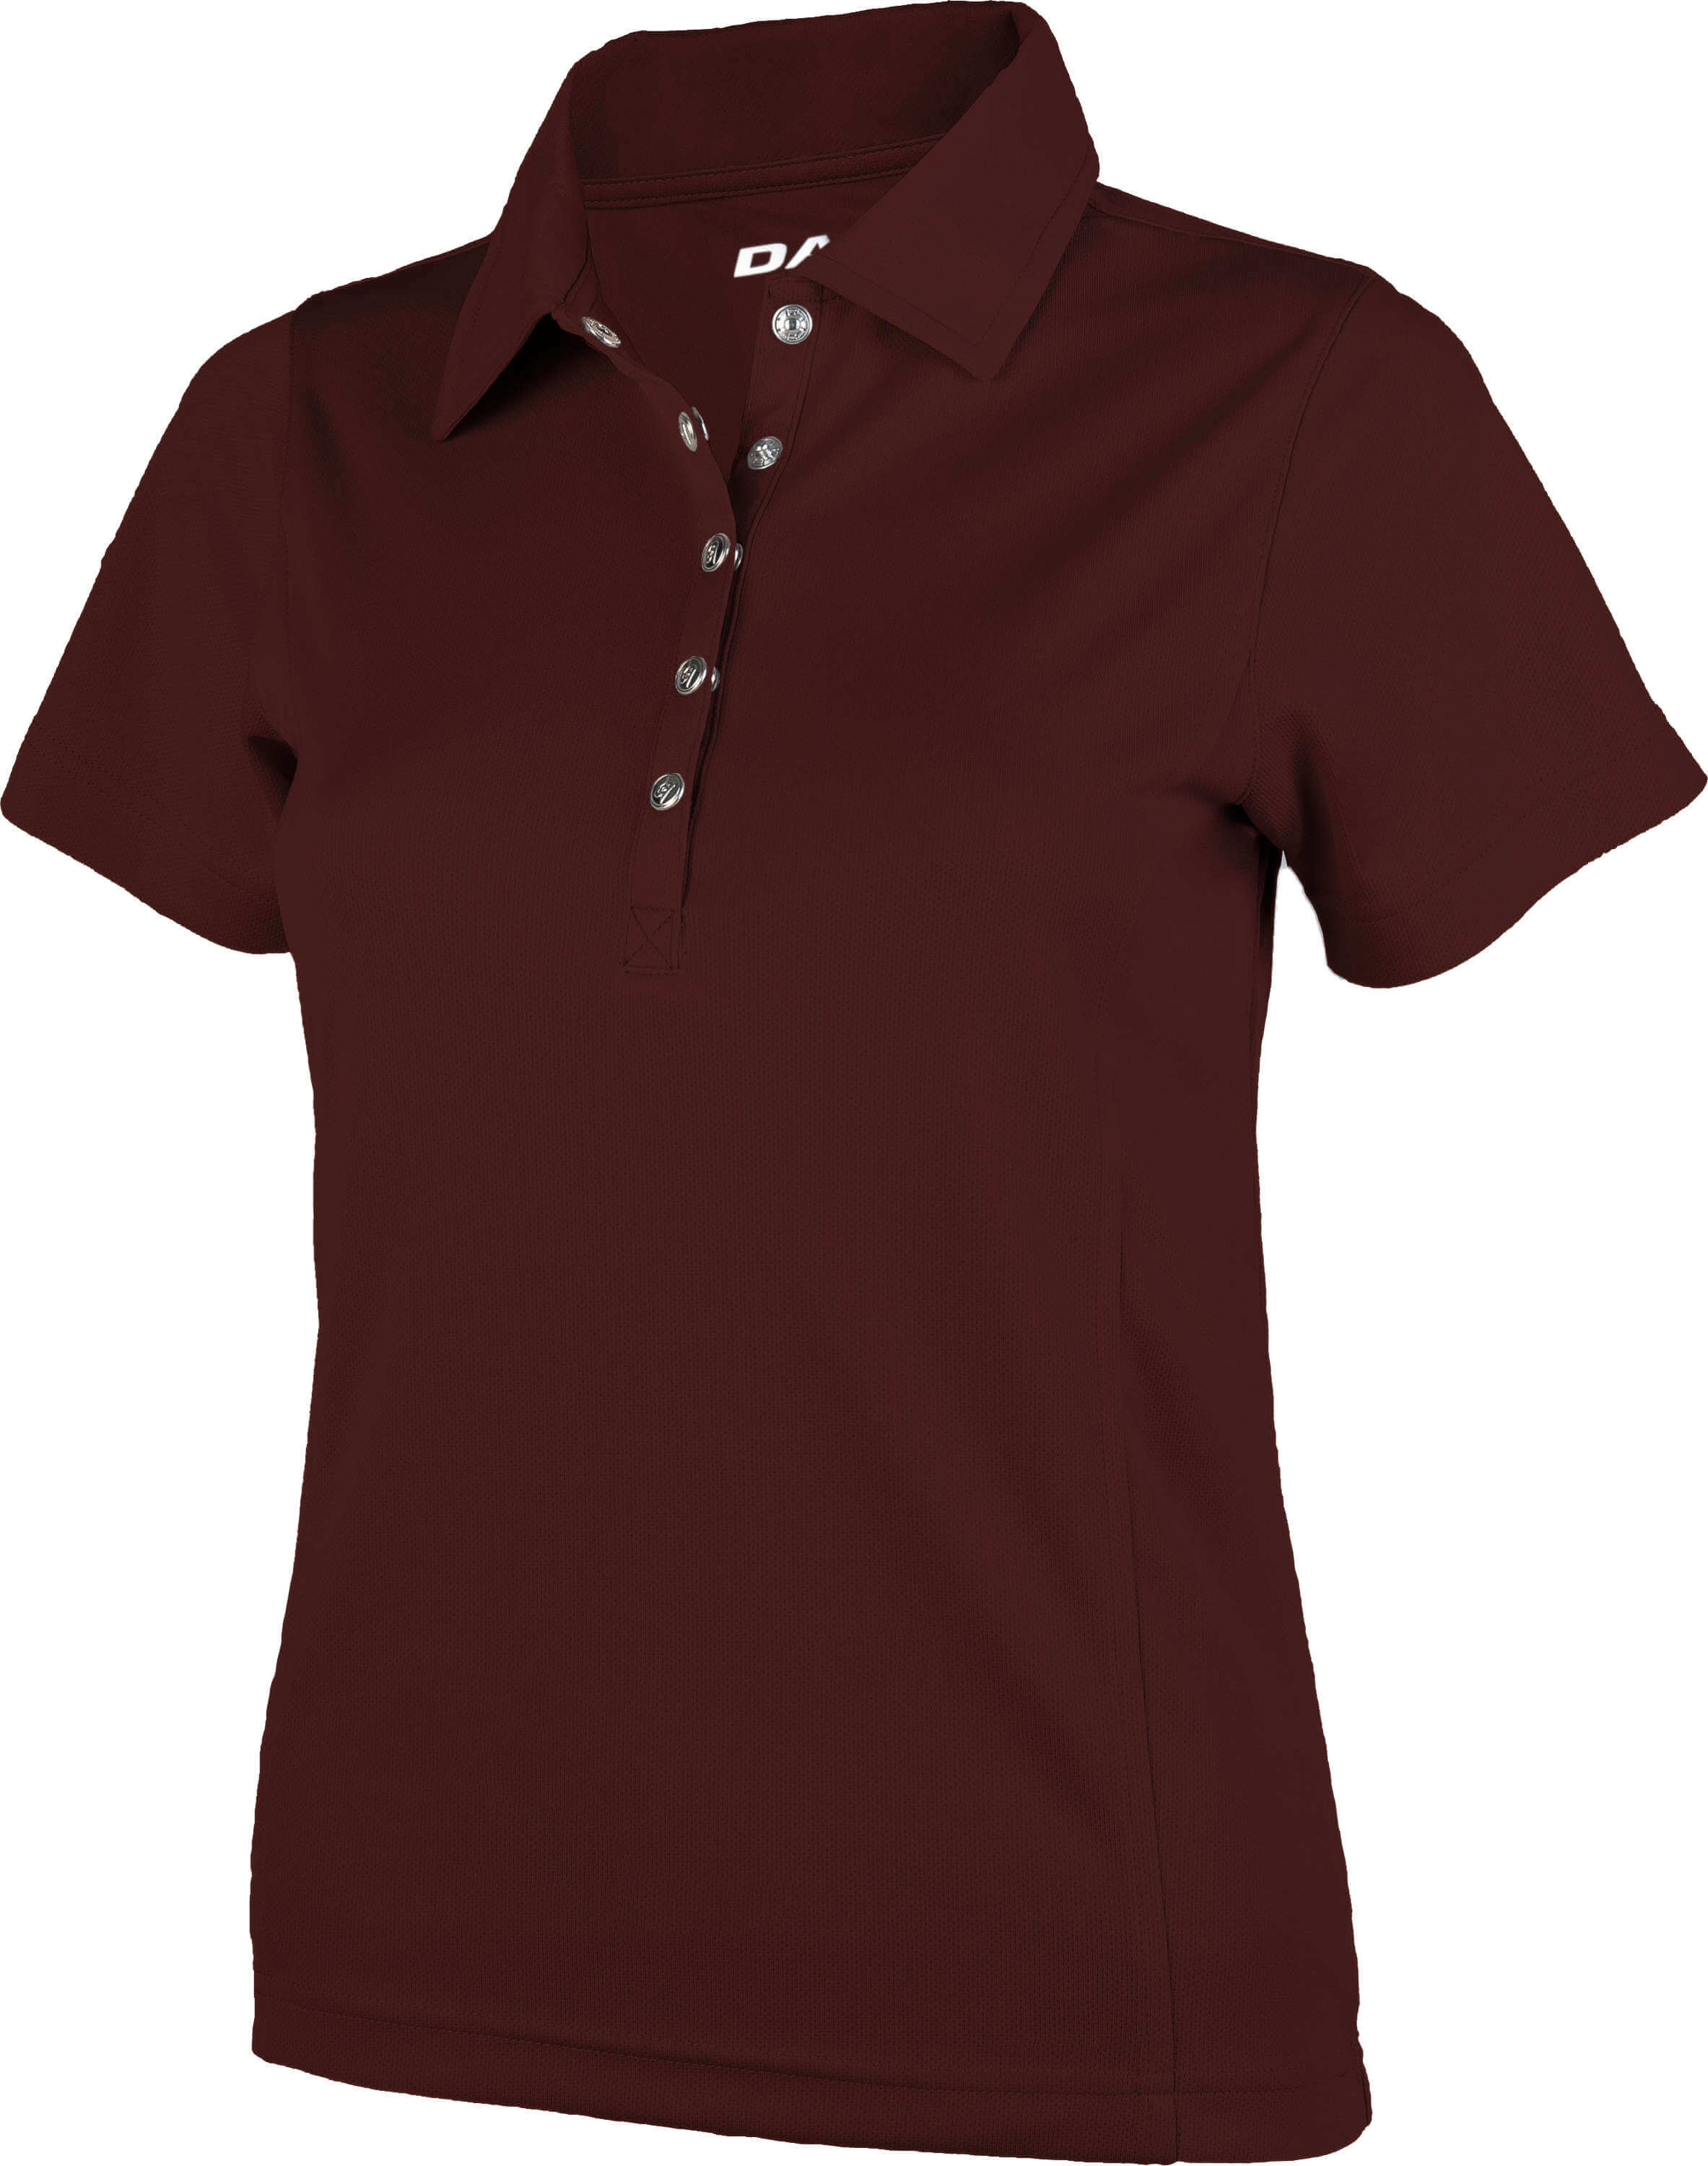 Daily Sports Macy Special Edition Polo, bordeaux